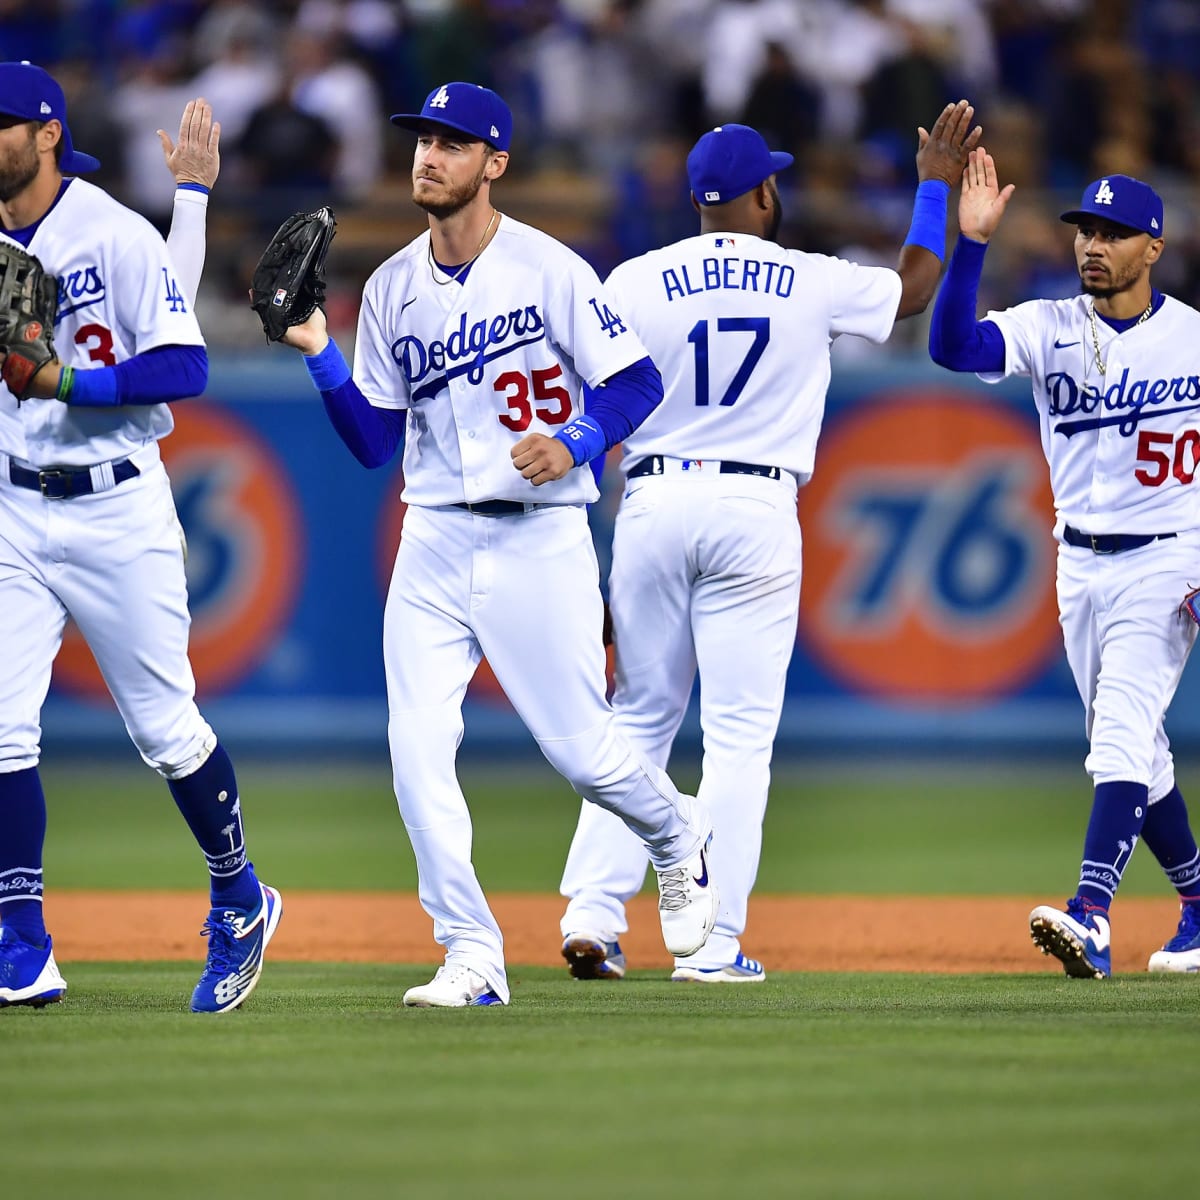 Best Dodgers players by uniform number